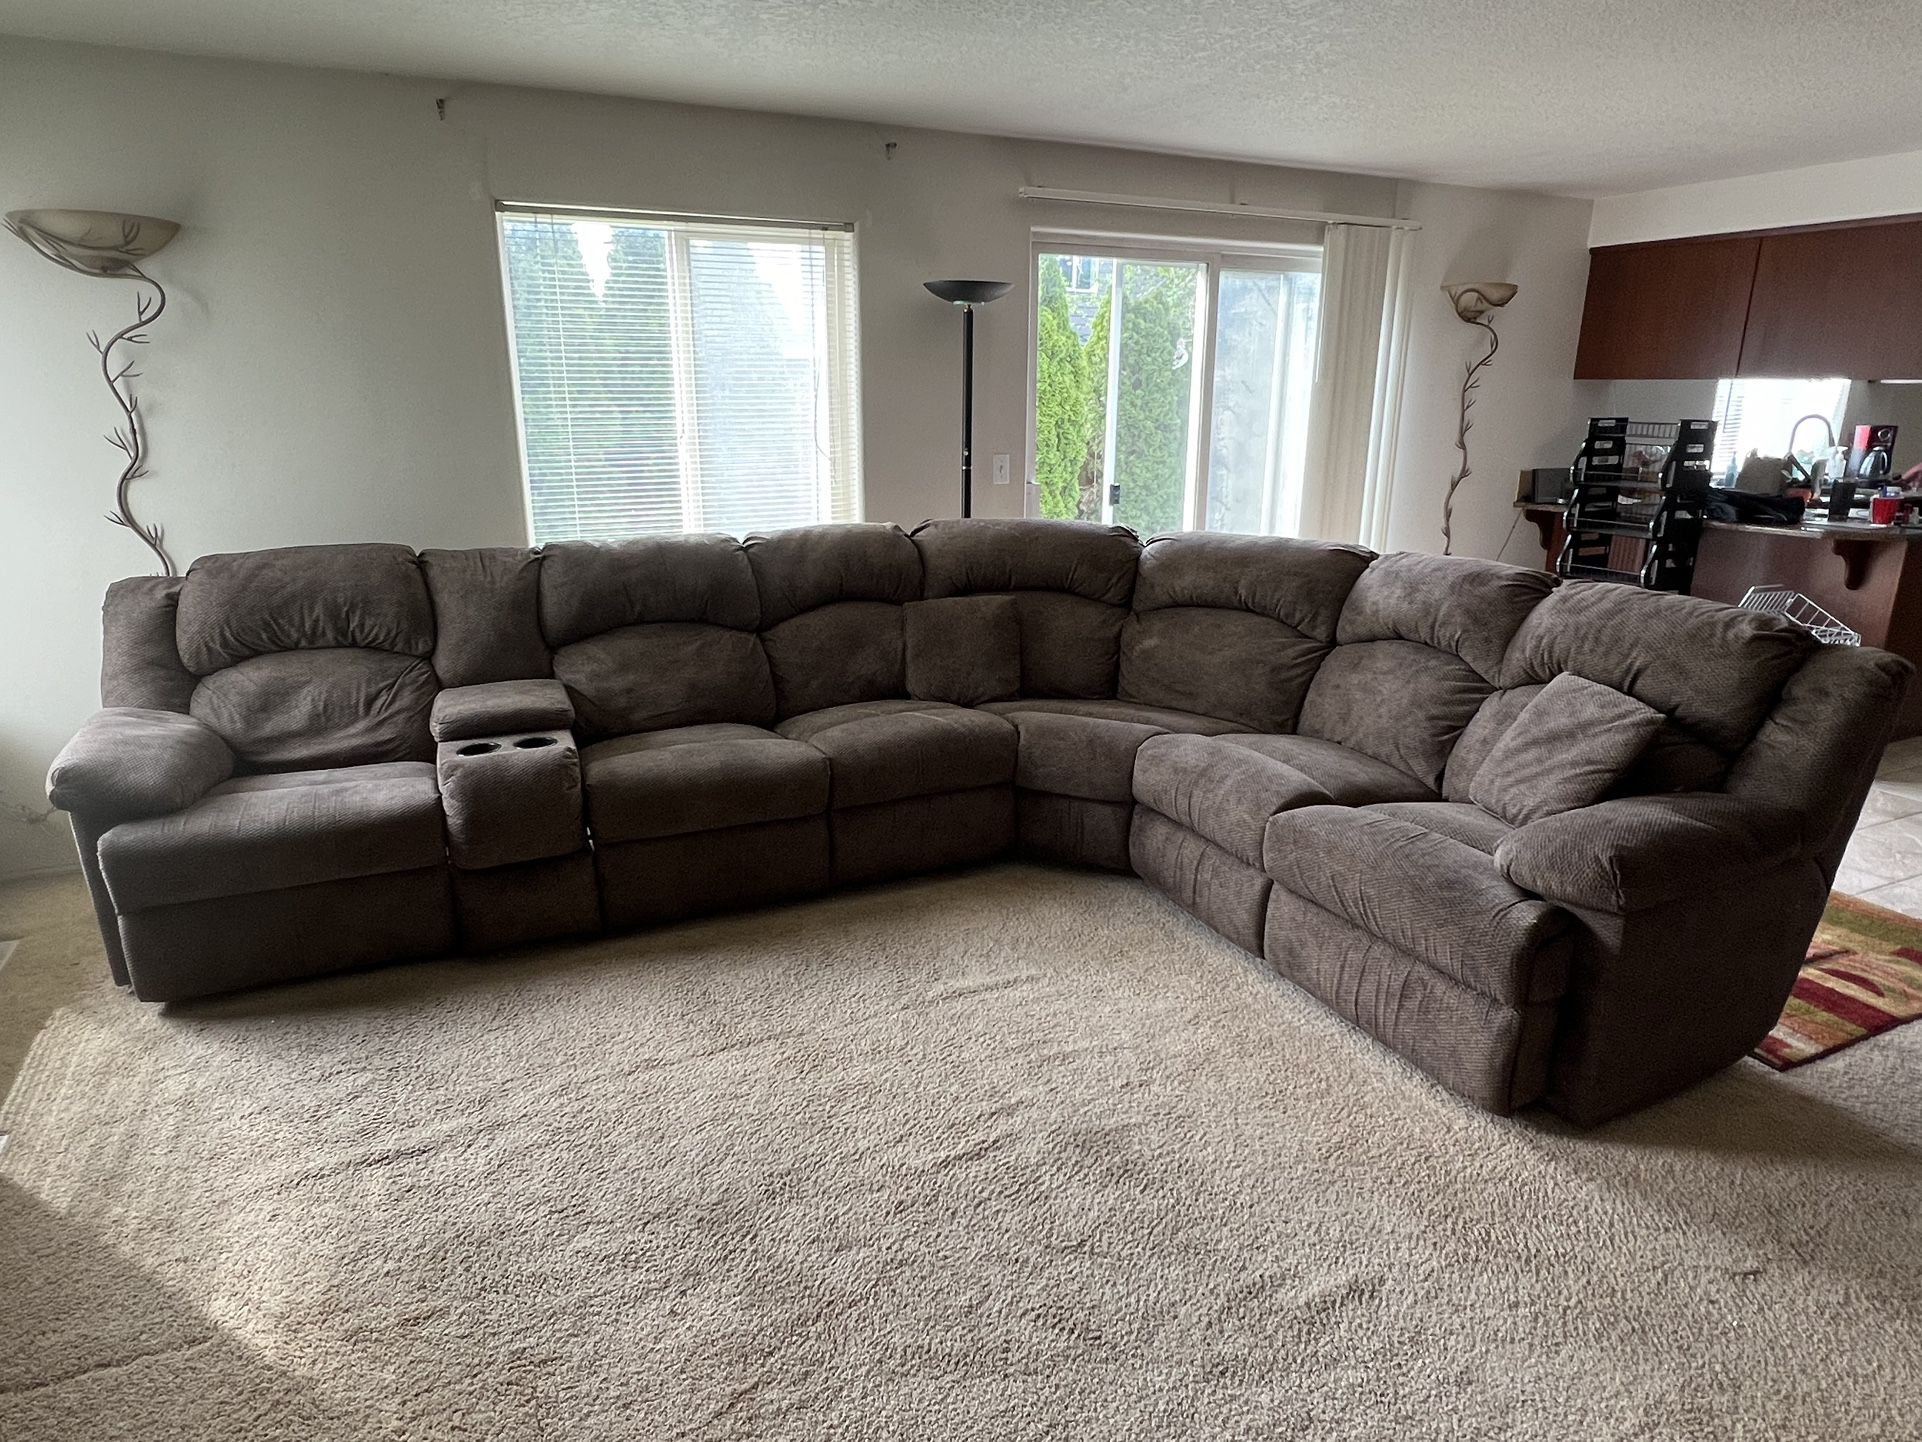 Large Sectional Sofa With Reclining Seats, Cupholders And and Storage